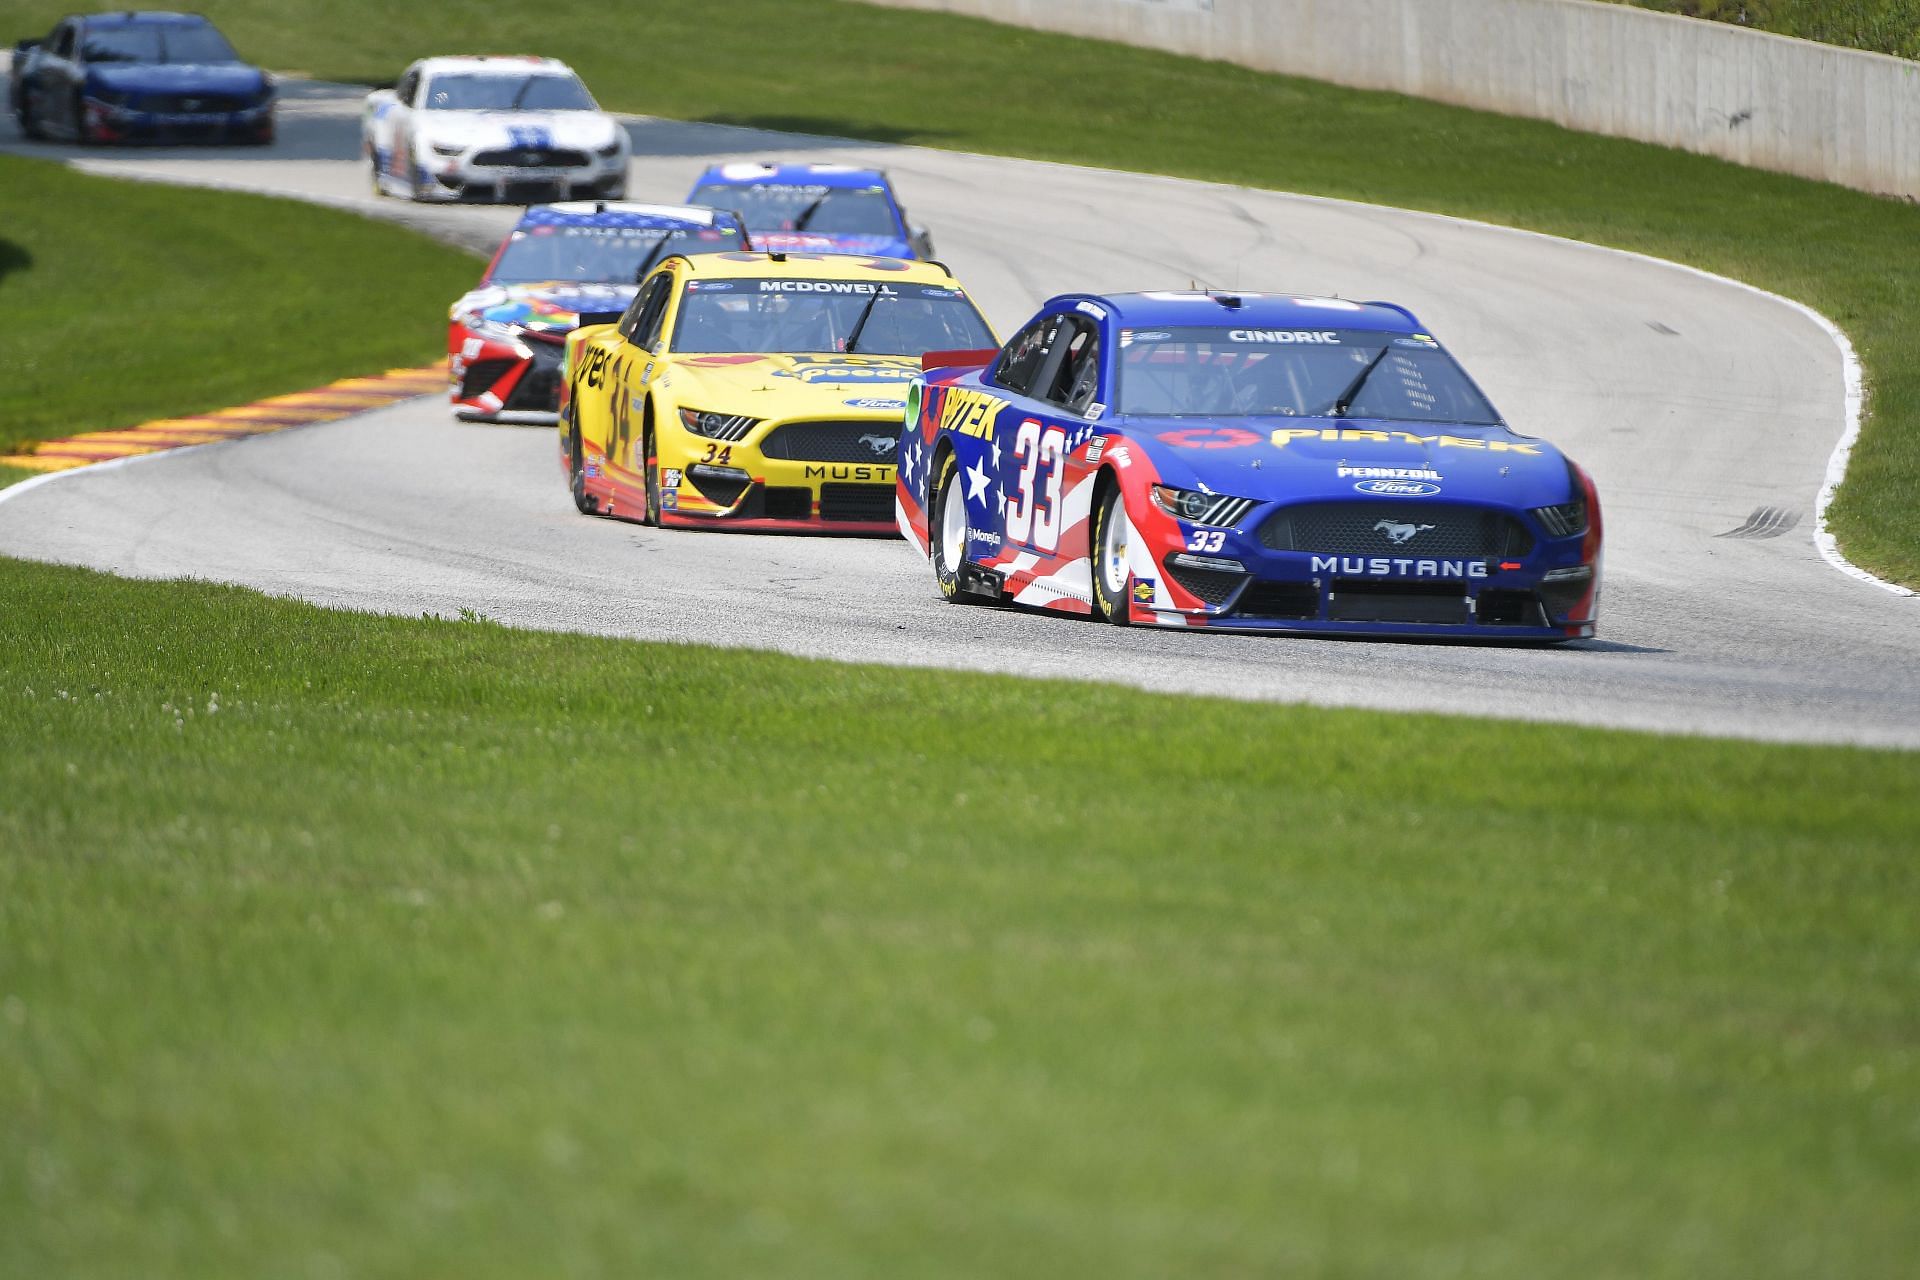 Austin Cindric (#33) leads the field during the NASCAR Cup Series Jockey Made in America 250 Presented by Kwik Trip at Road America (Photo by Logan Riely/Getty Images)